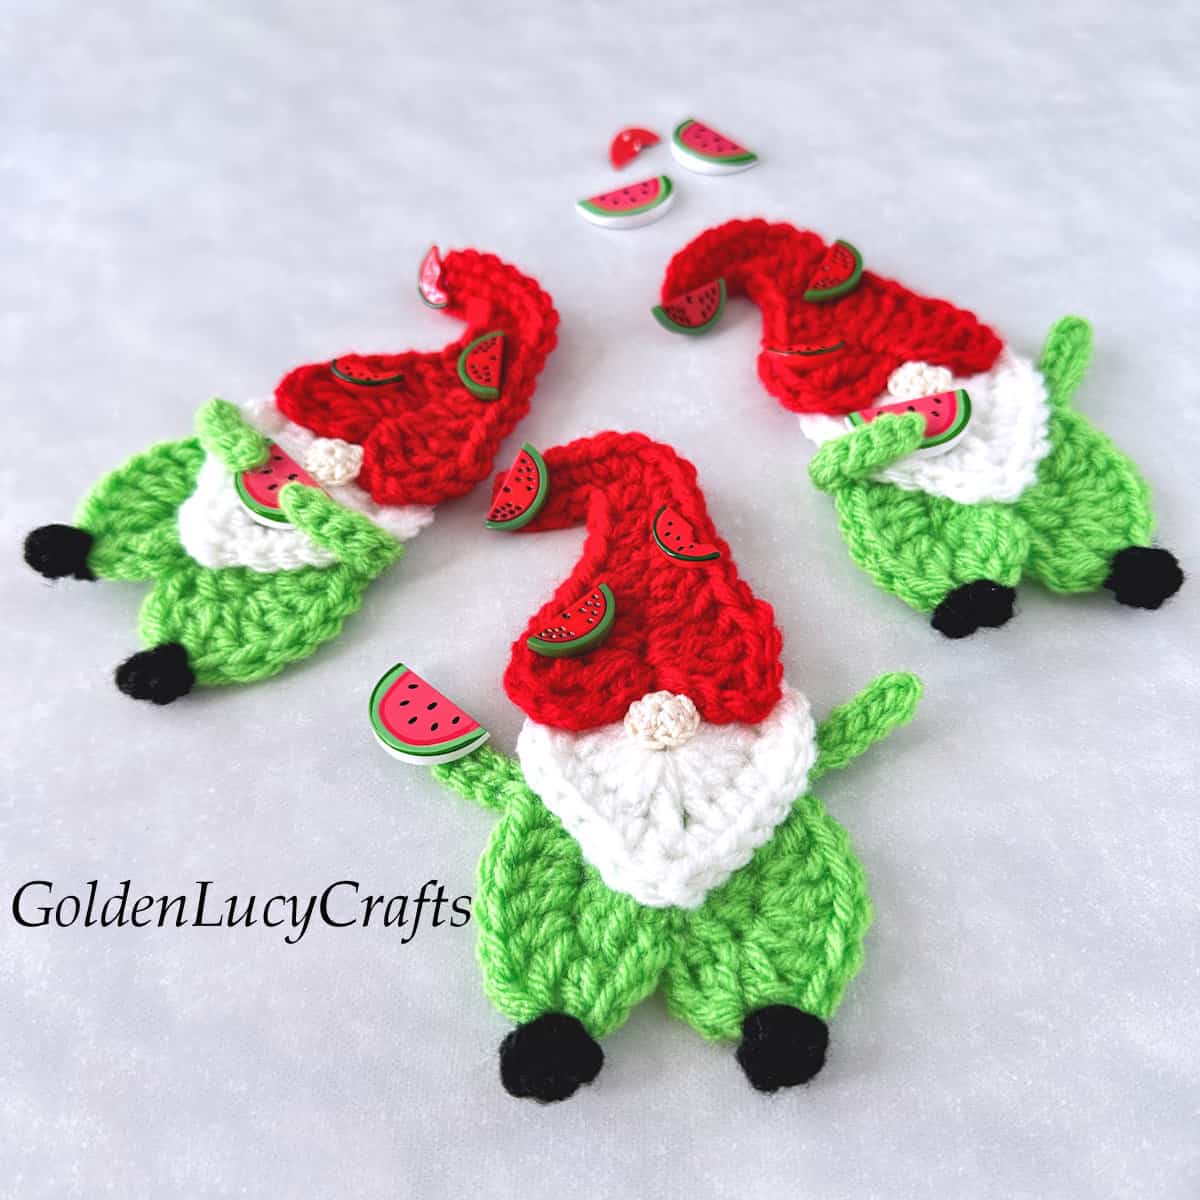 Crochet gnomes with red caps embellished with watermelon buttons.